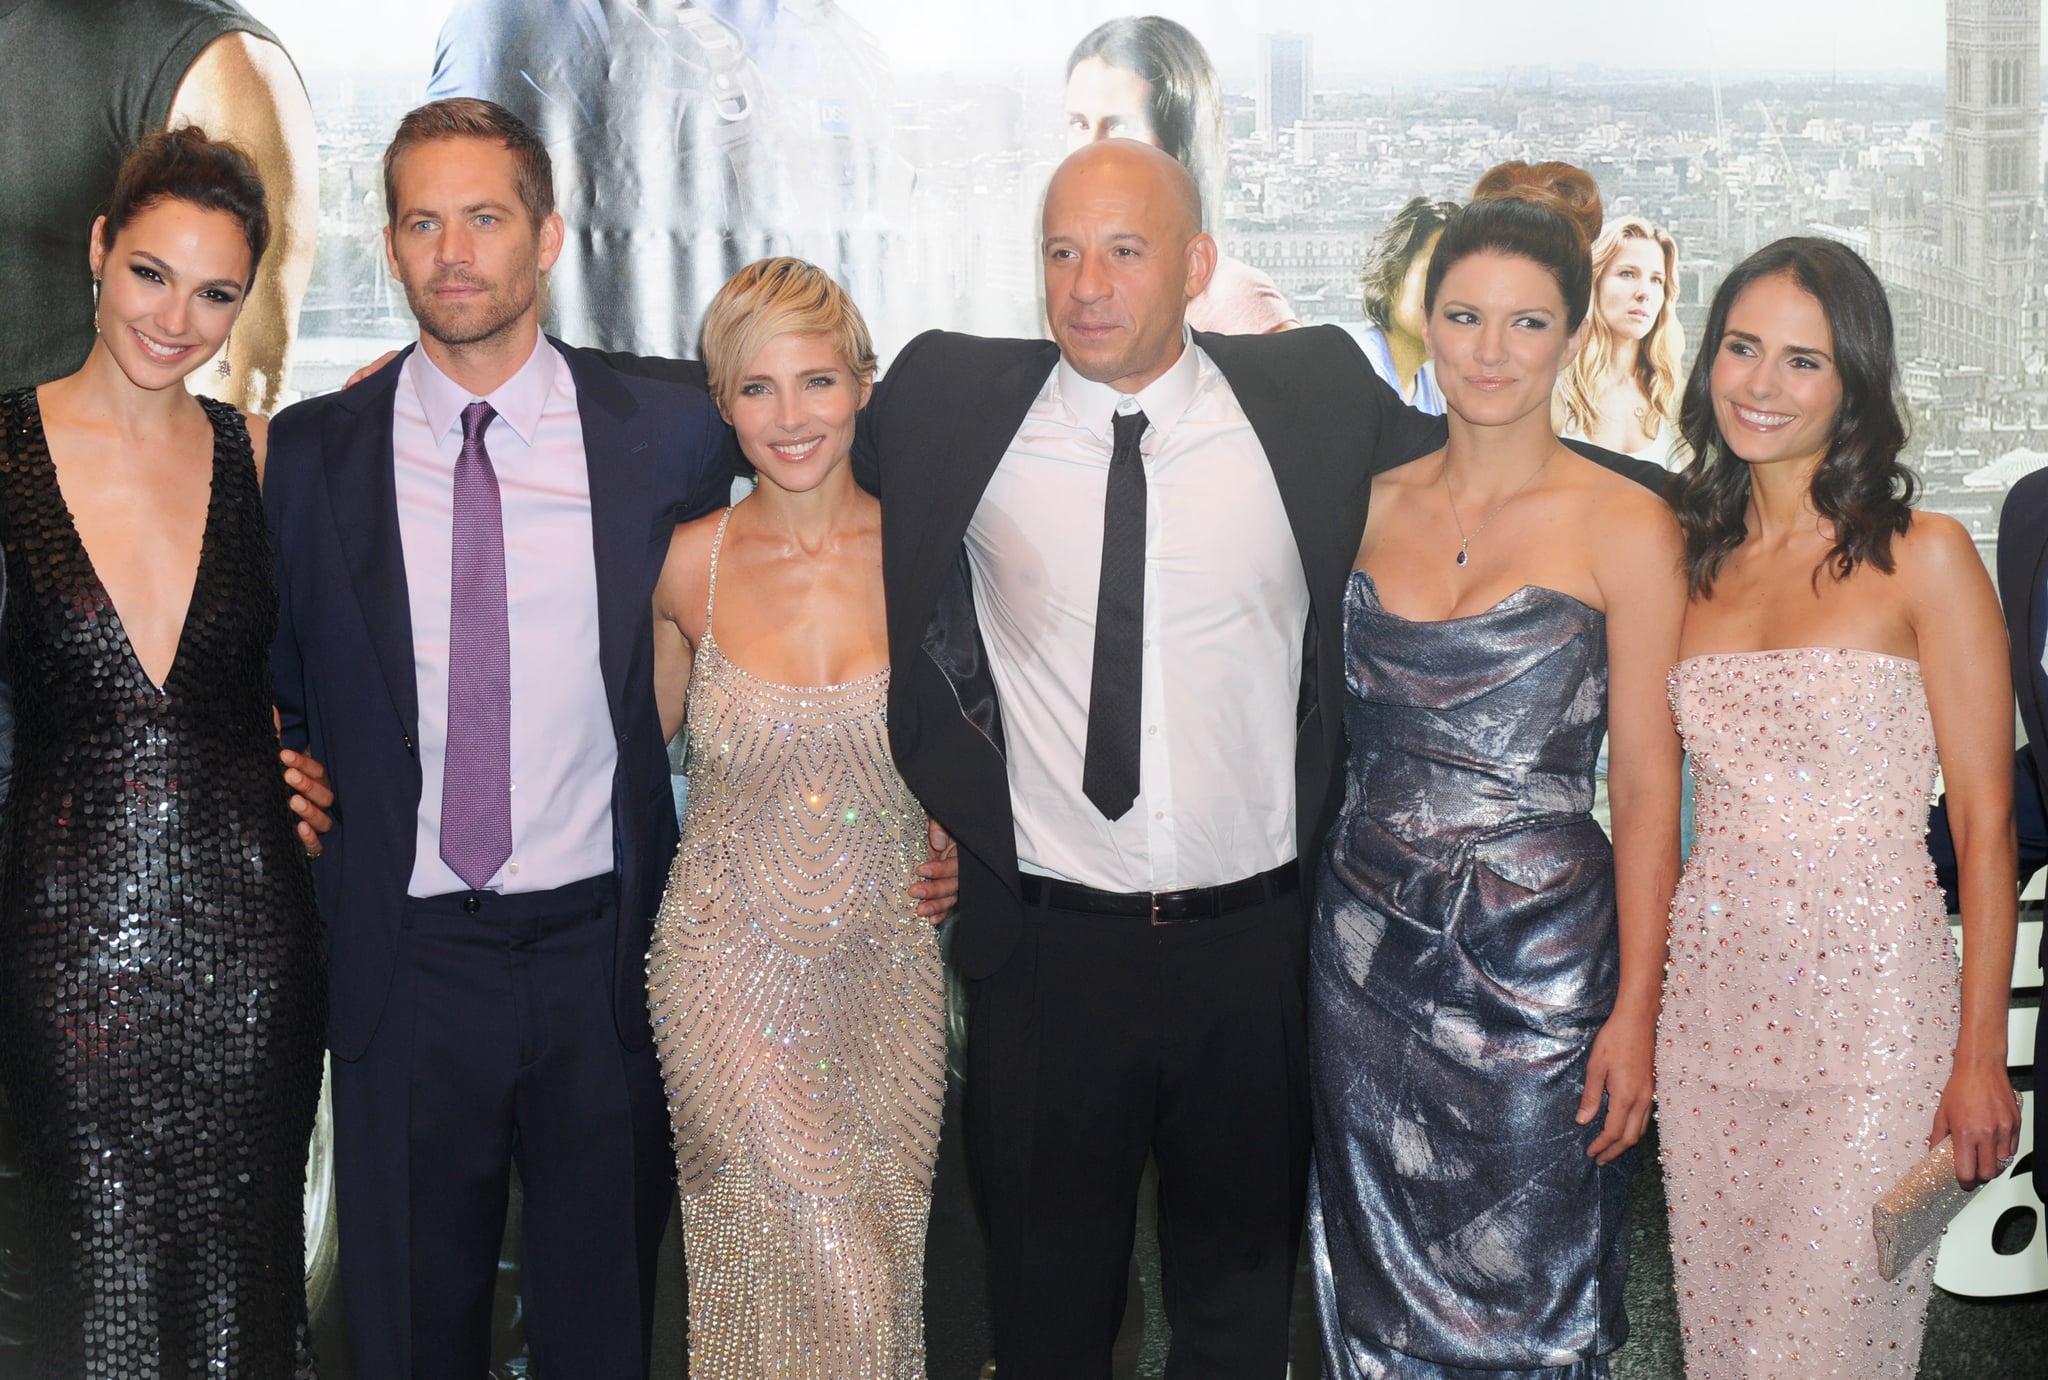 Fast and furious 6 cast